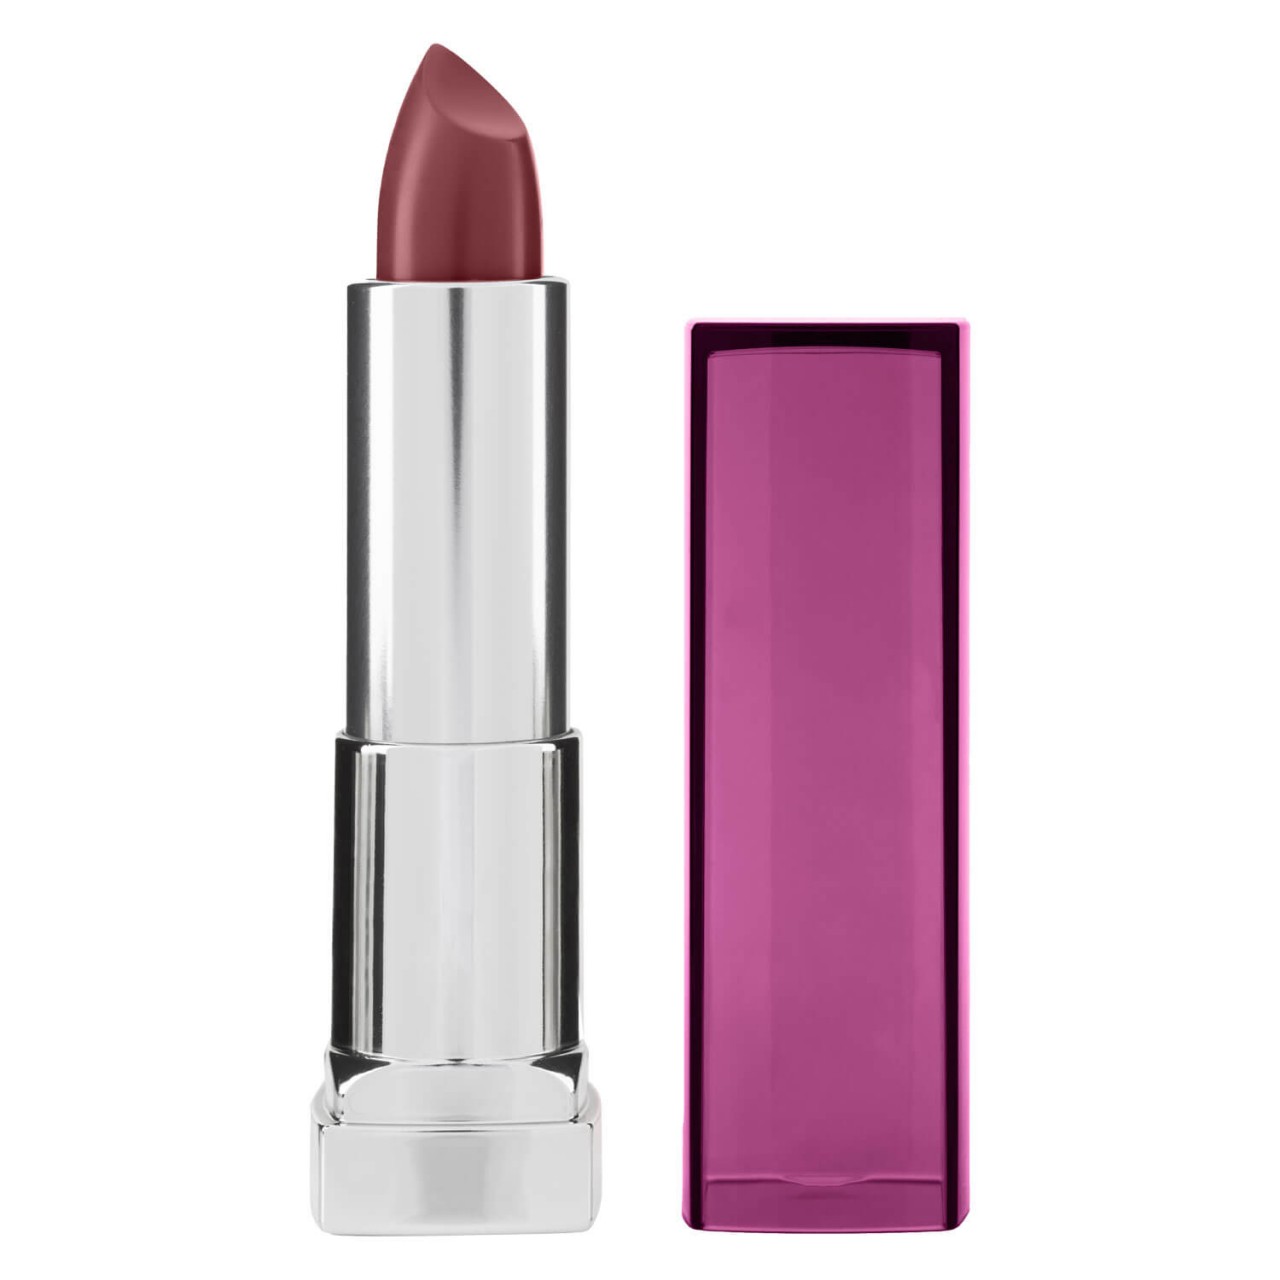 Maybelline NY Lips - Color Sensational Smoked Roses Lippenstift Nr. 320 Steamy Rose von Maybelline New York